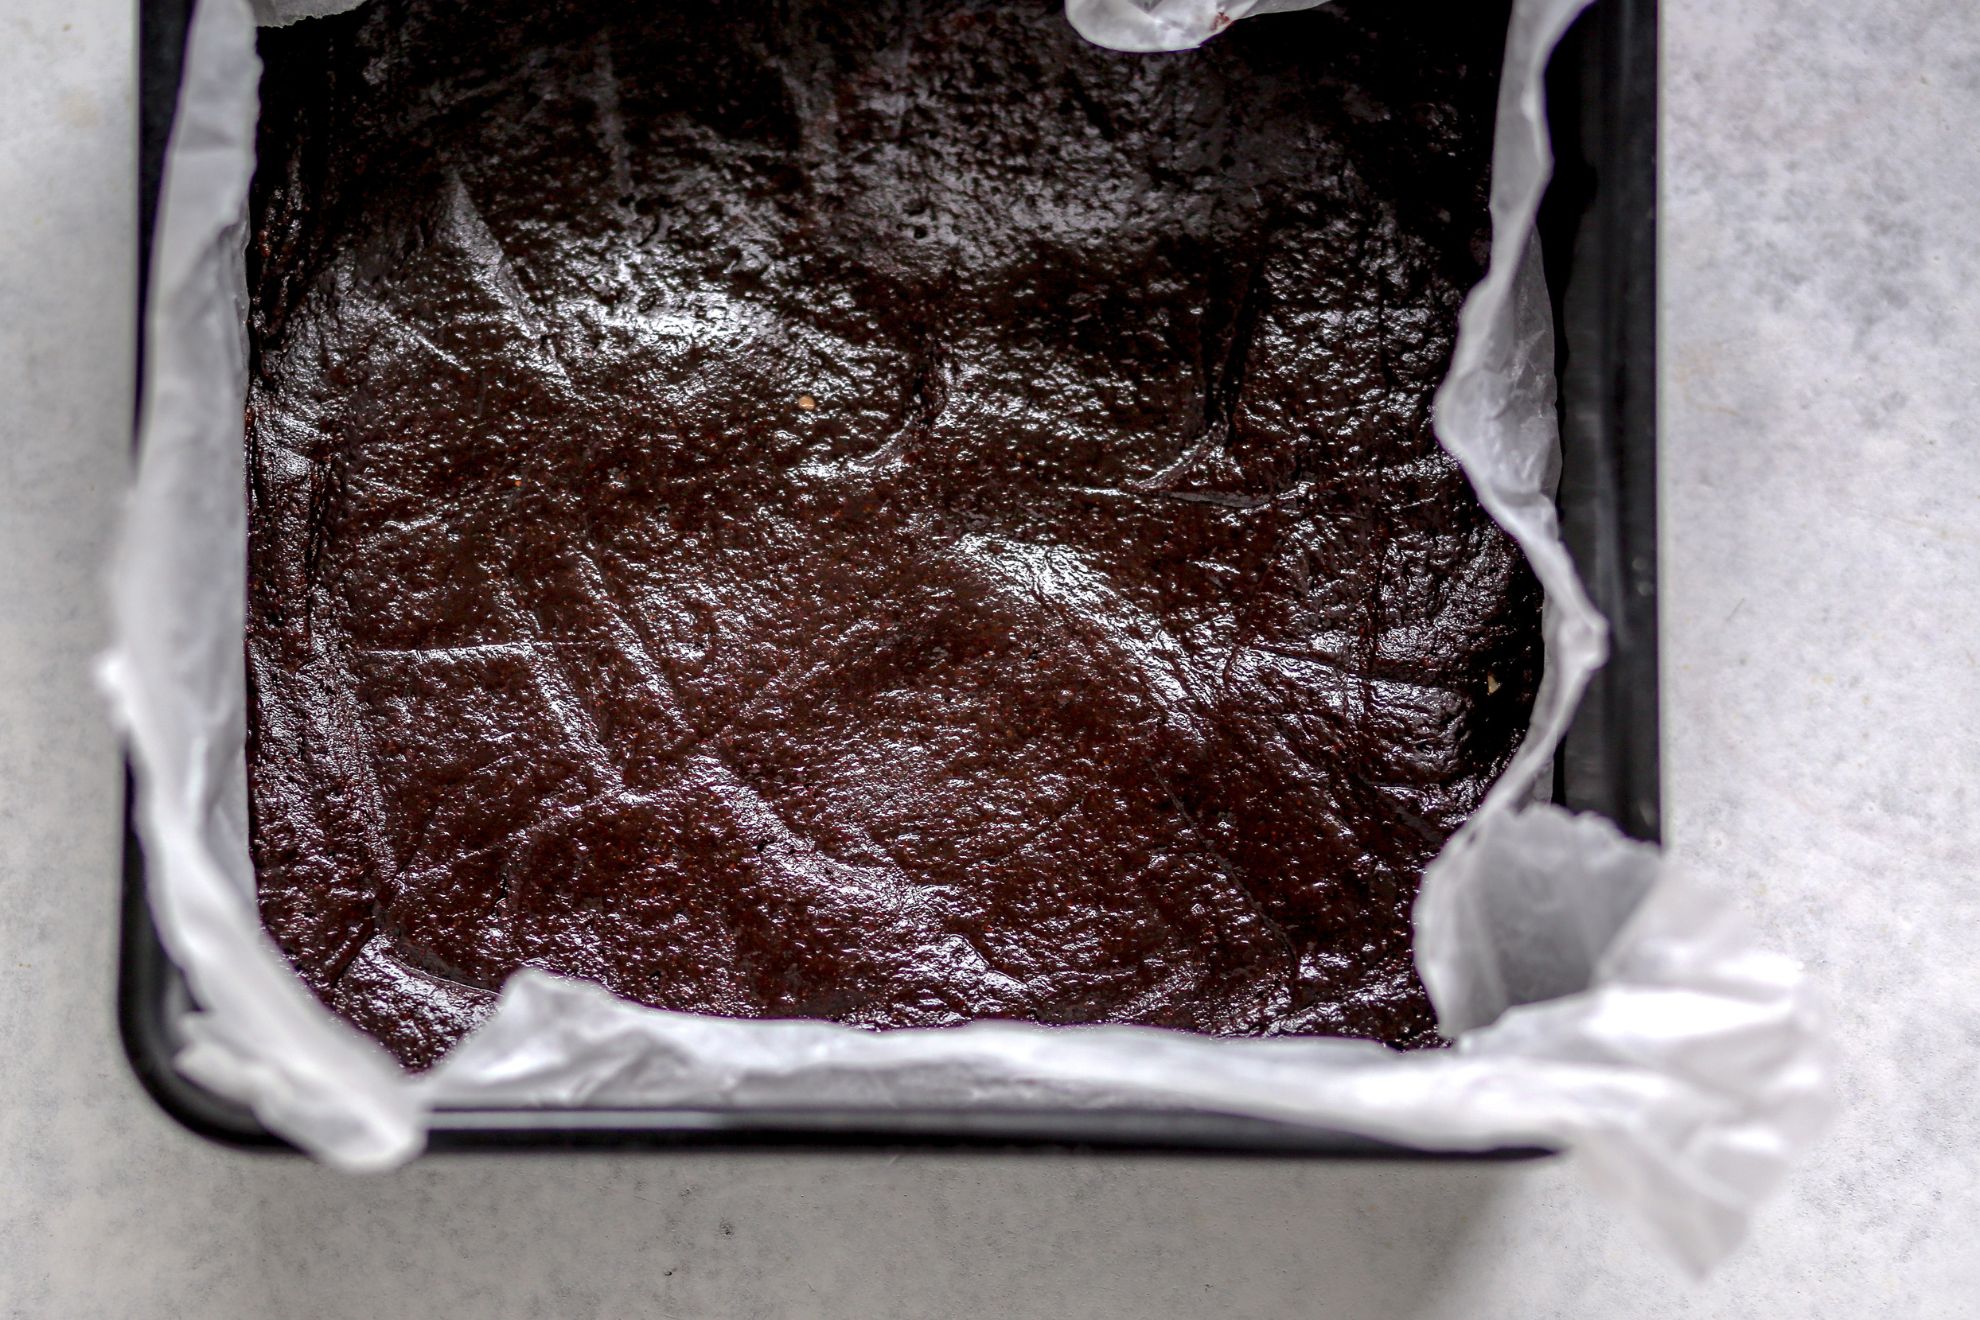 This is an overhead image of a square pan lined with parchment paper and filled with a fudgey raw brownie batter. The pan sits on a light grey surface.